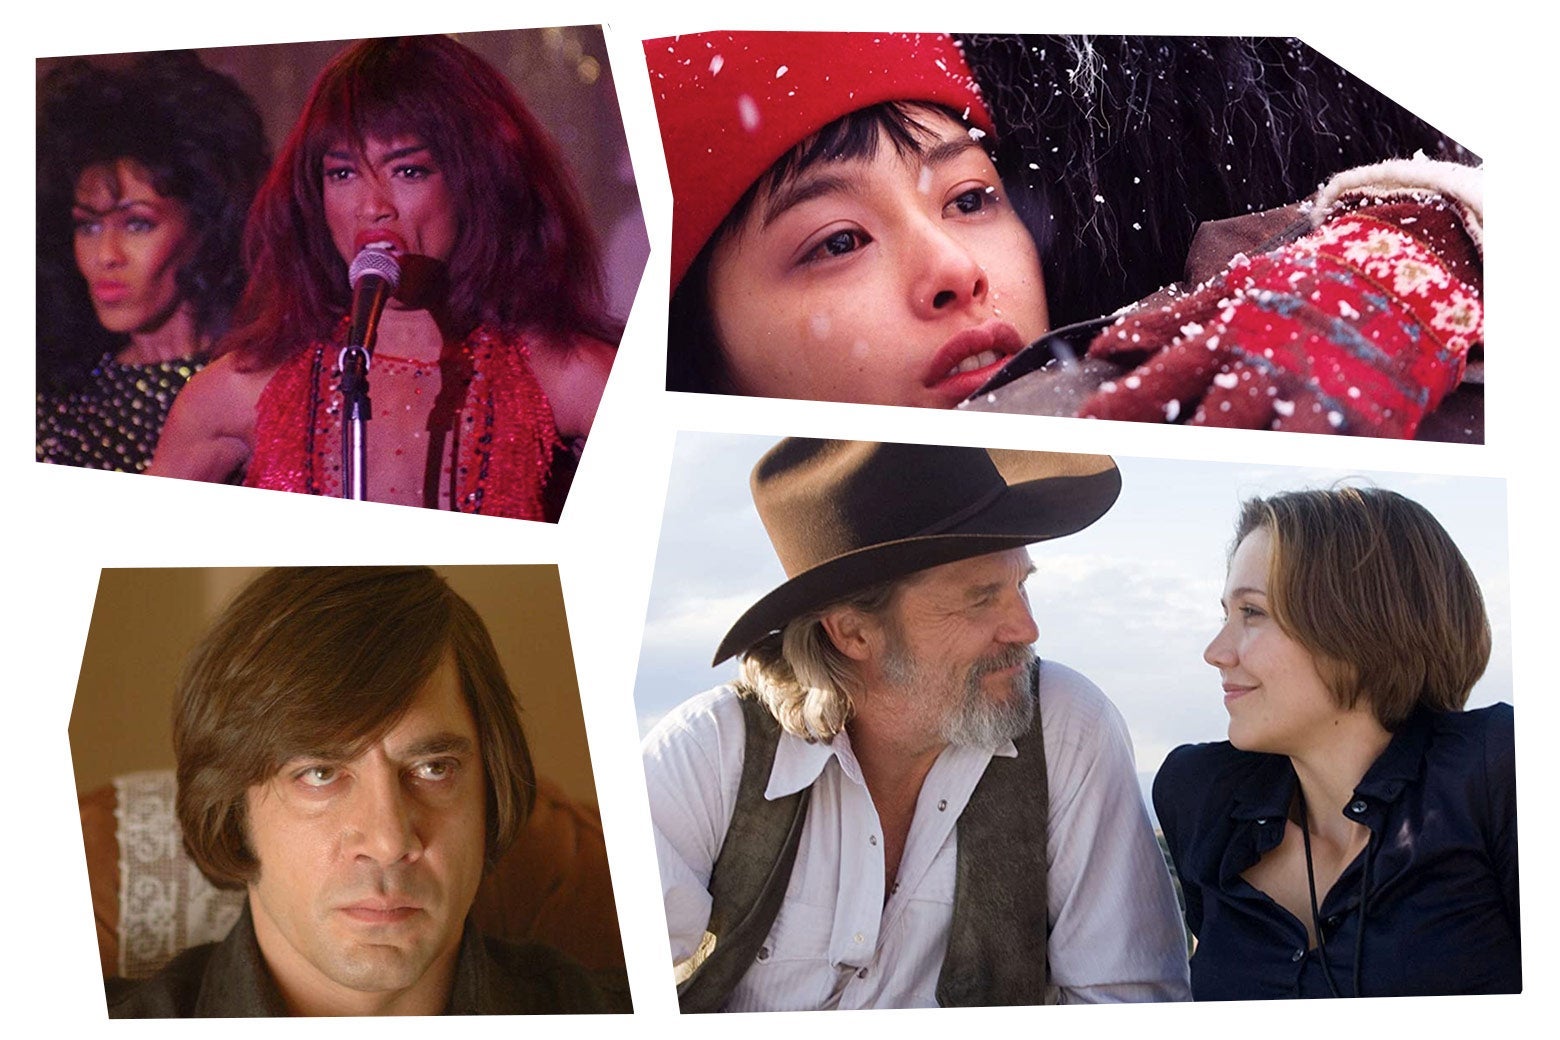 In the upper left corner, of Angela Basset singing from What's Love Got To Do With It; in the upper right corner, A still of a woman hugging someone while it's snowing from Oldboy; in the bottom left, a still of Javier Bardem looking straight faced from No Country for Old Men; in the bottom right, Jeff Bridges in a cowboy hat looking with a smile at Maggie Gyllenhaal who is returning his look with a smile from Crazy Heart. 